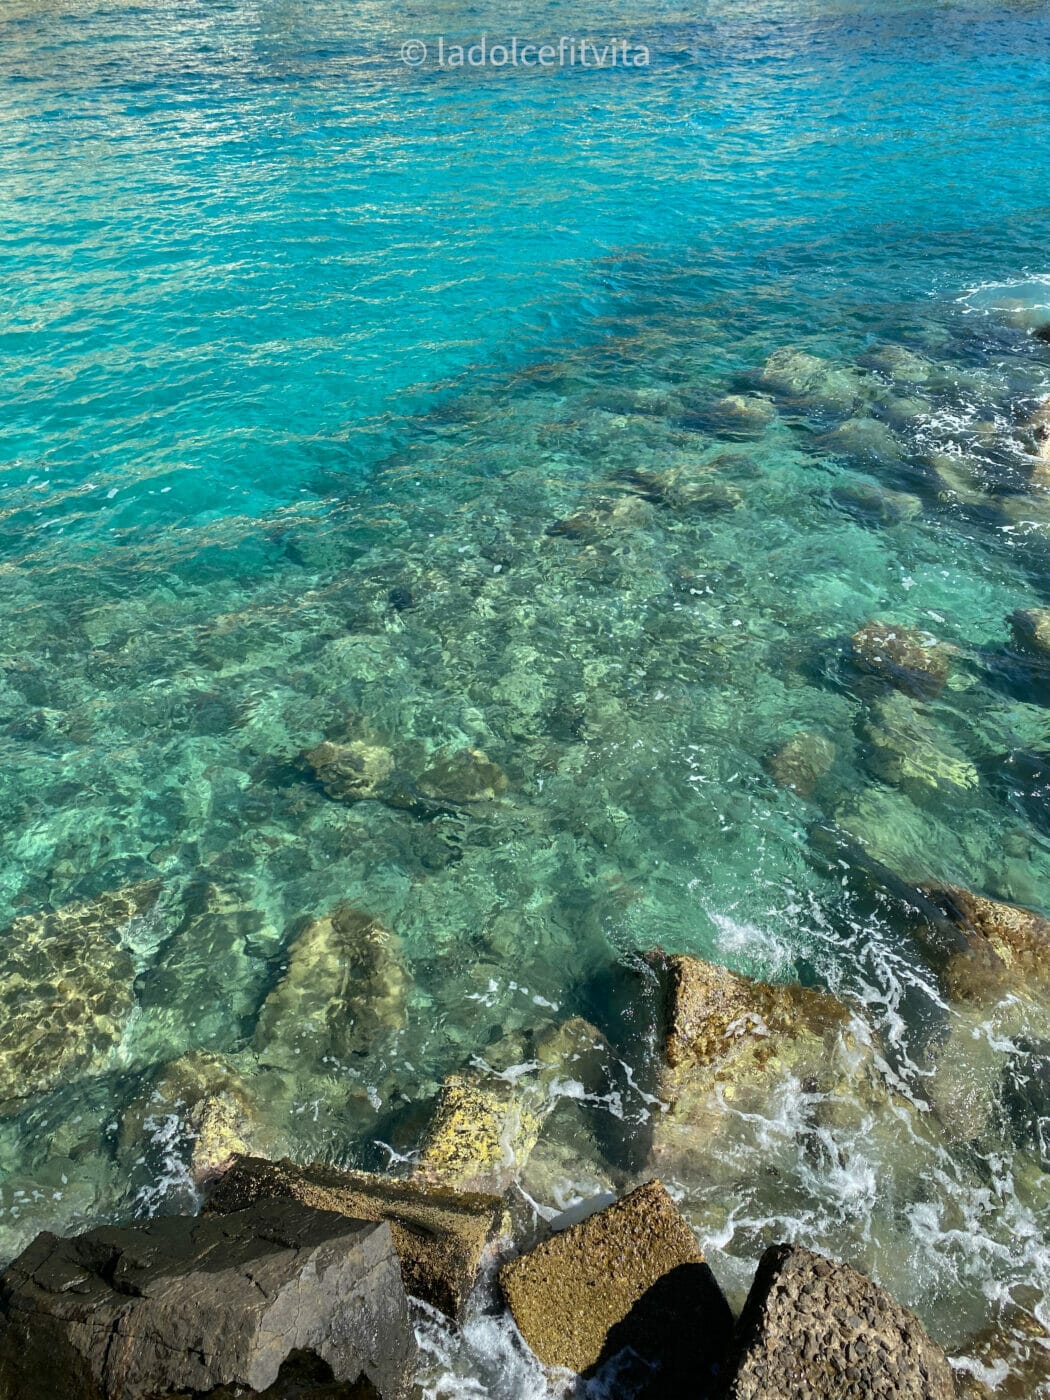 turquoise sparkling water of the Tyrrhenian Sea as seen from the beach in Pizzo Calabria